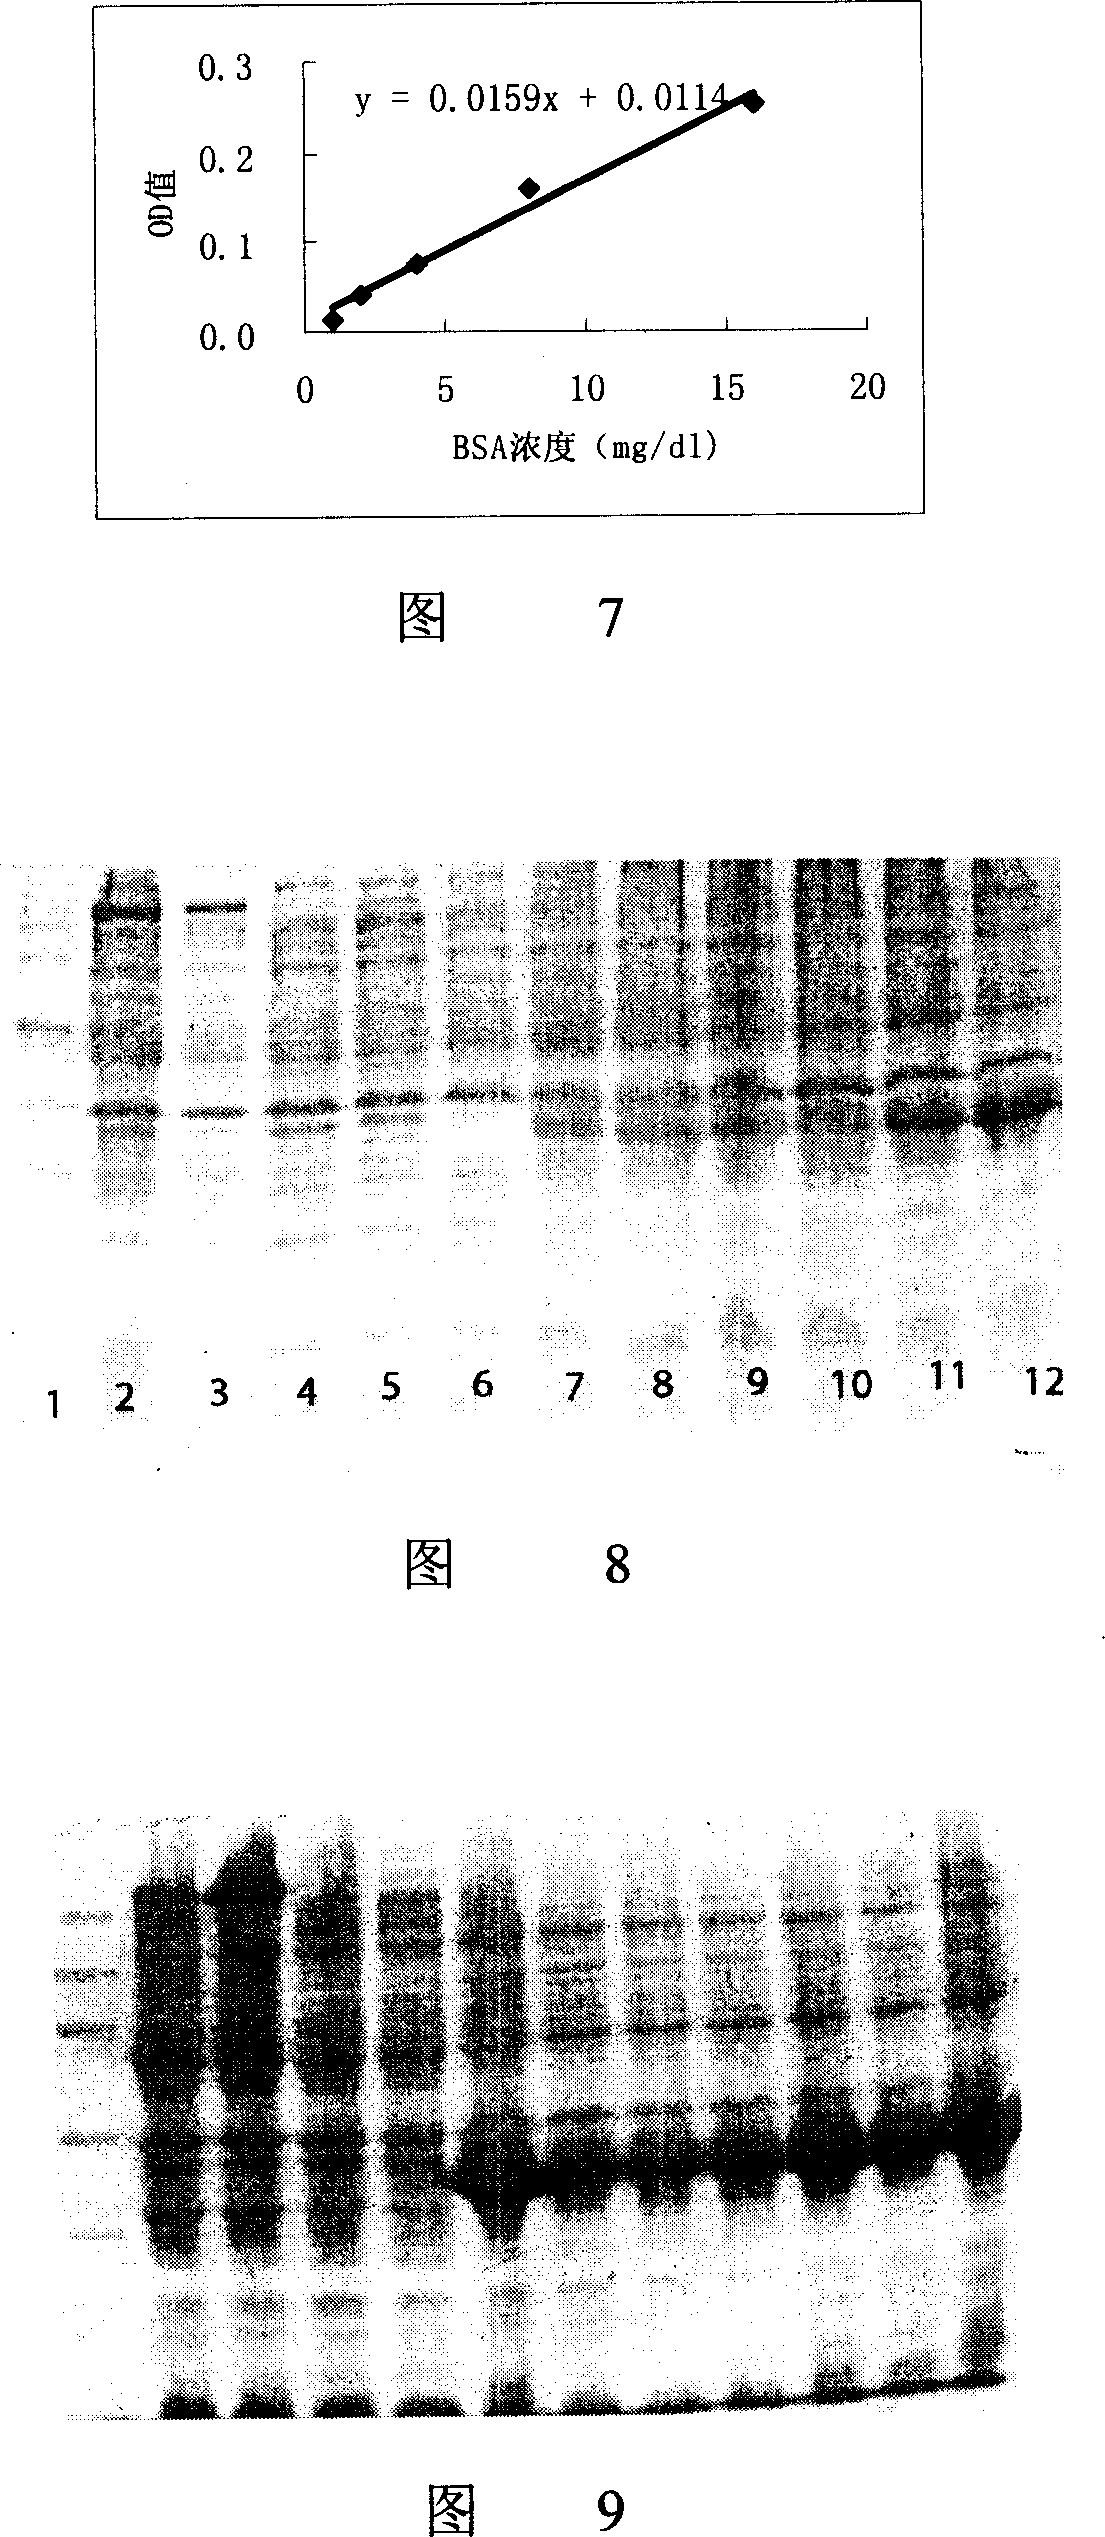 Gene expression product of extro-cellular domain carboxyl end of human thyrotropin receptor, its preparing method and application in enzyme immune technology